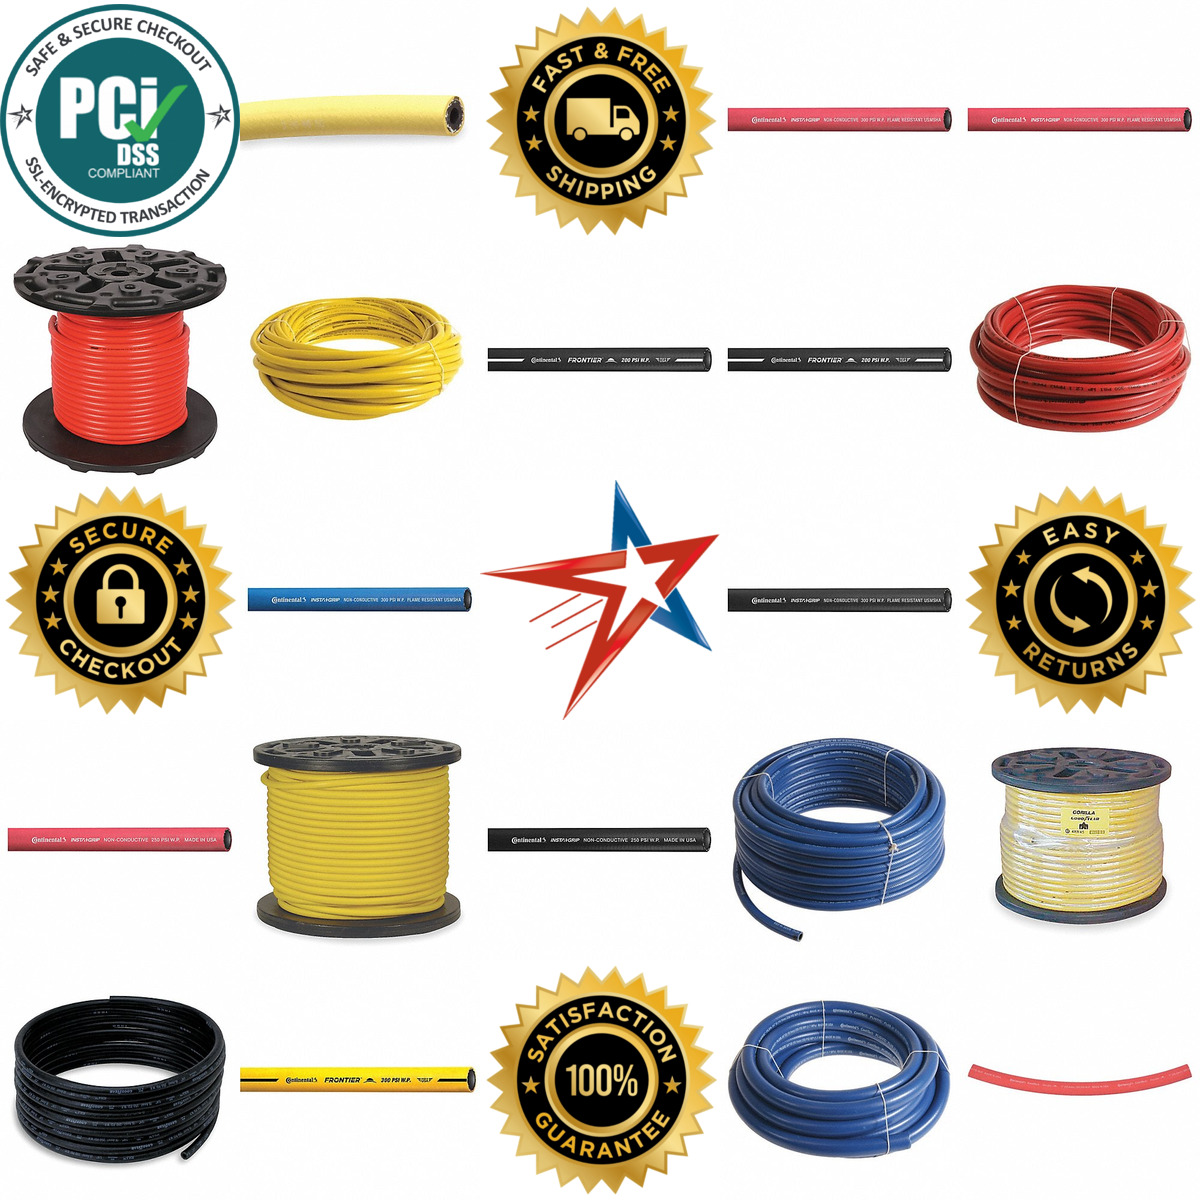 A selection of Bulk Air Hose products on GoVets